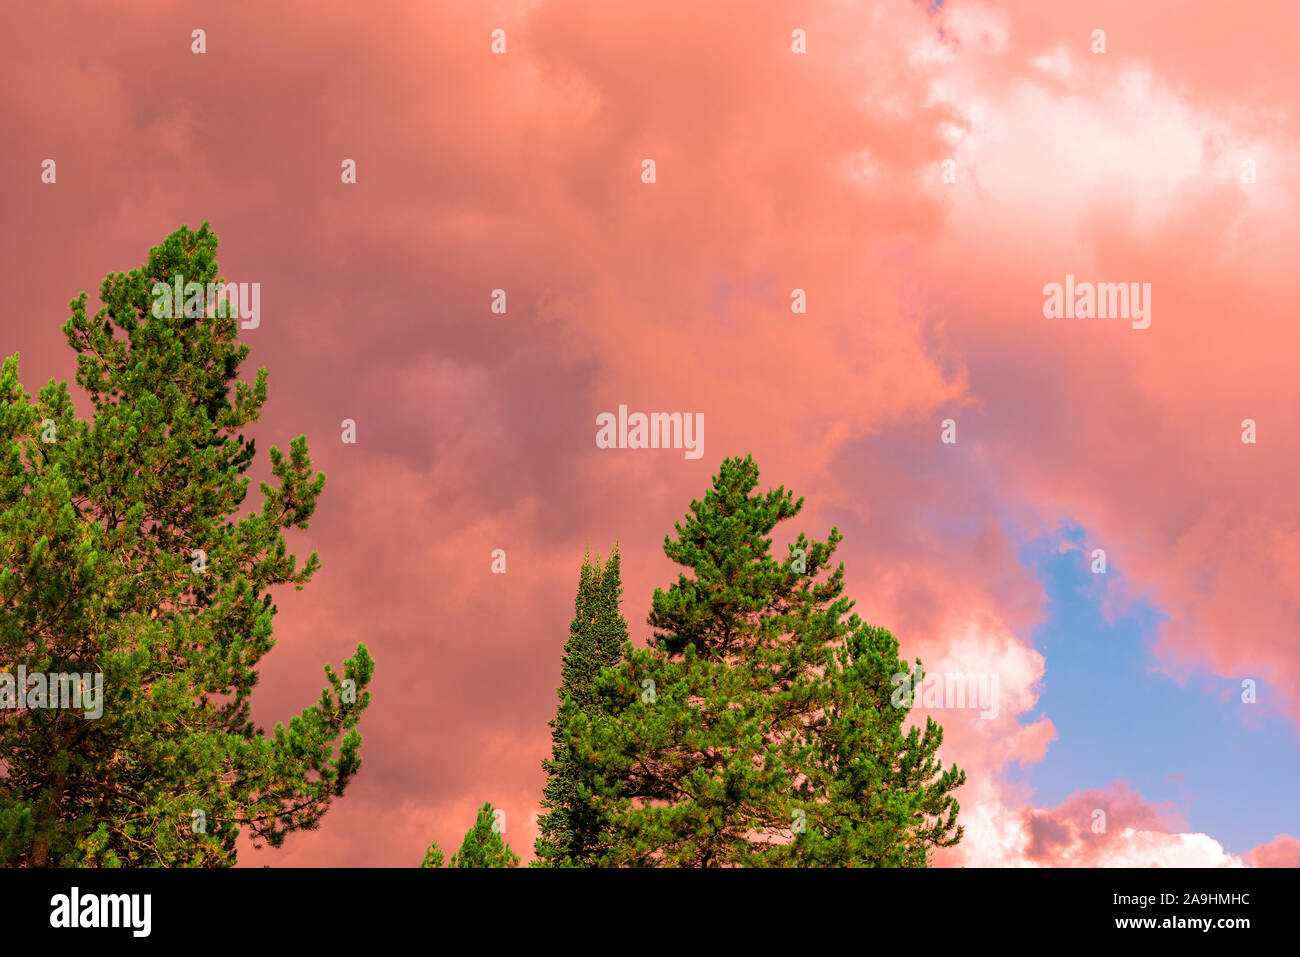 Looking at tops of pine trees at sunset with colorful clouds. Stock Photo